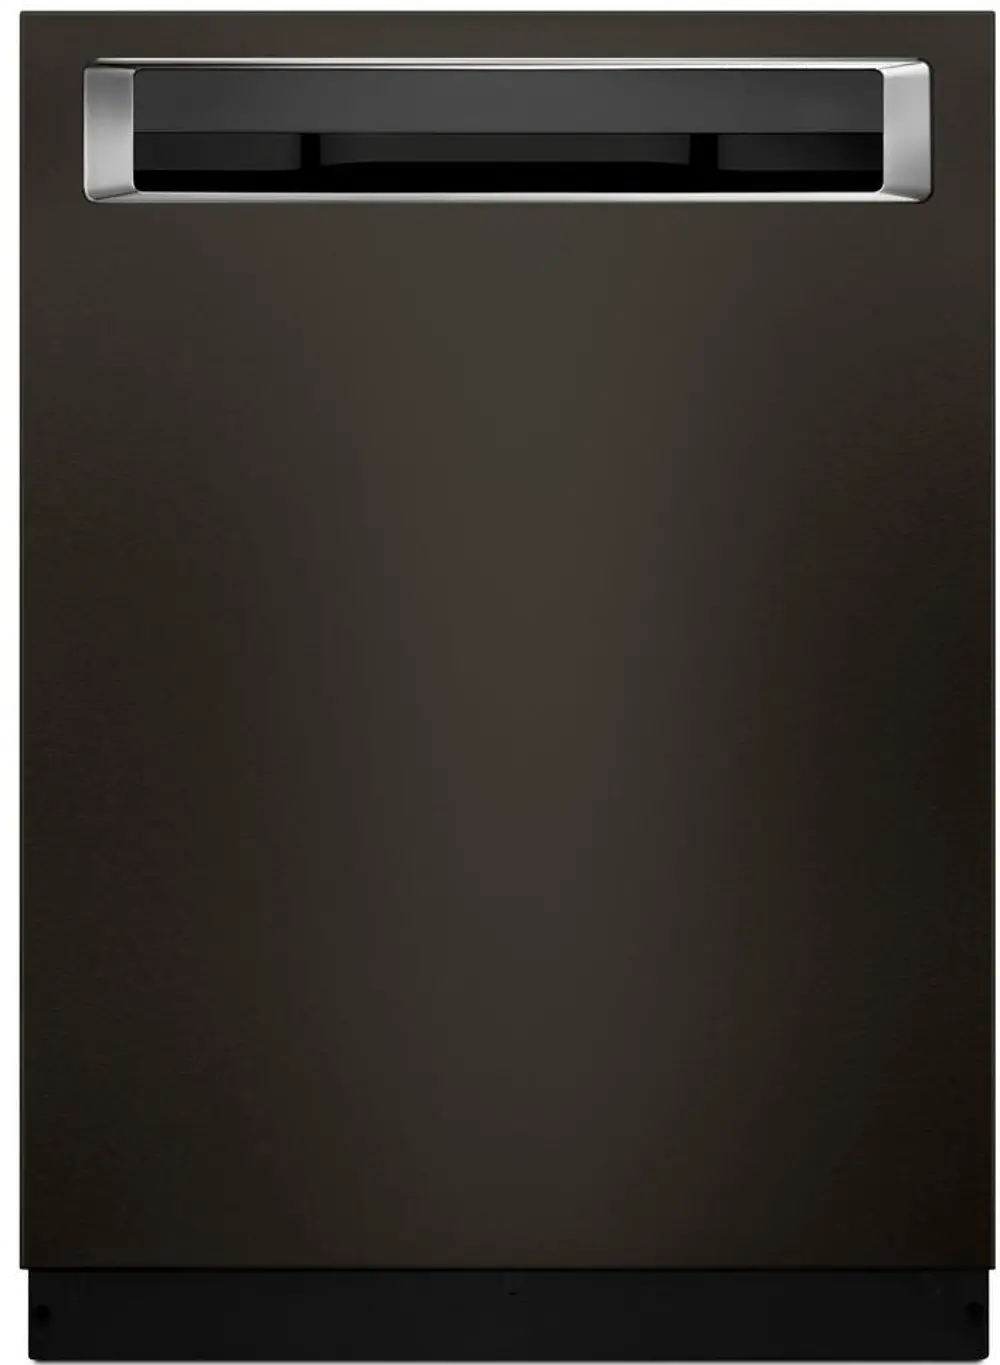 KDPE234GBS KitchenAid Dishwasher with Third Level Rack - Black Stainless Steel-1